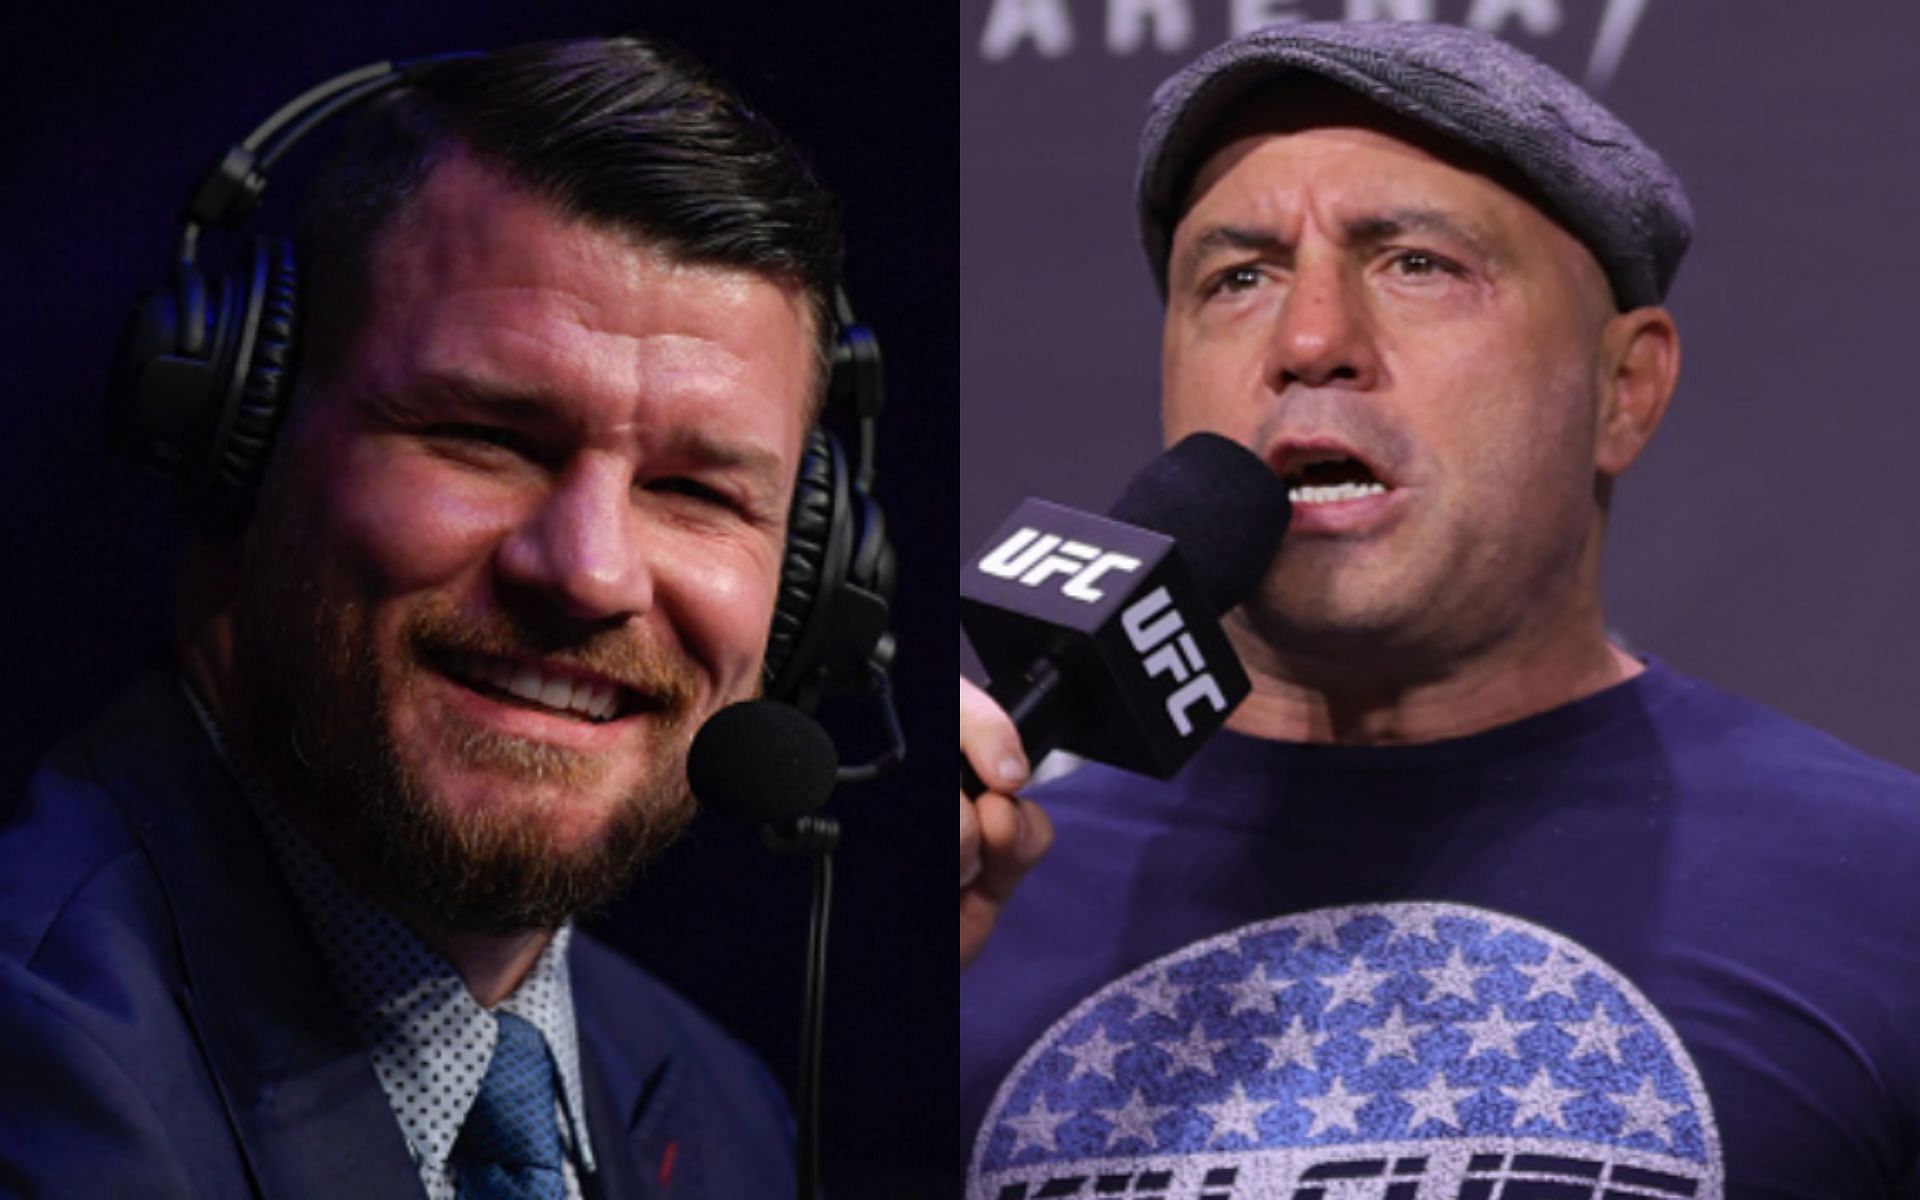 Bisping (left) is a former UFC middleweight champion; Rogan (right) is a longtime UFC commentator